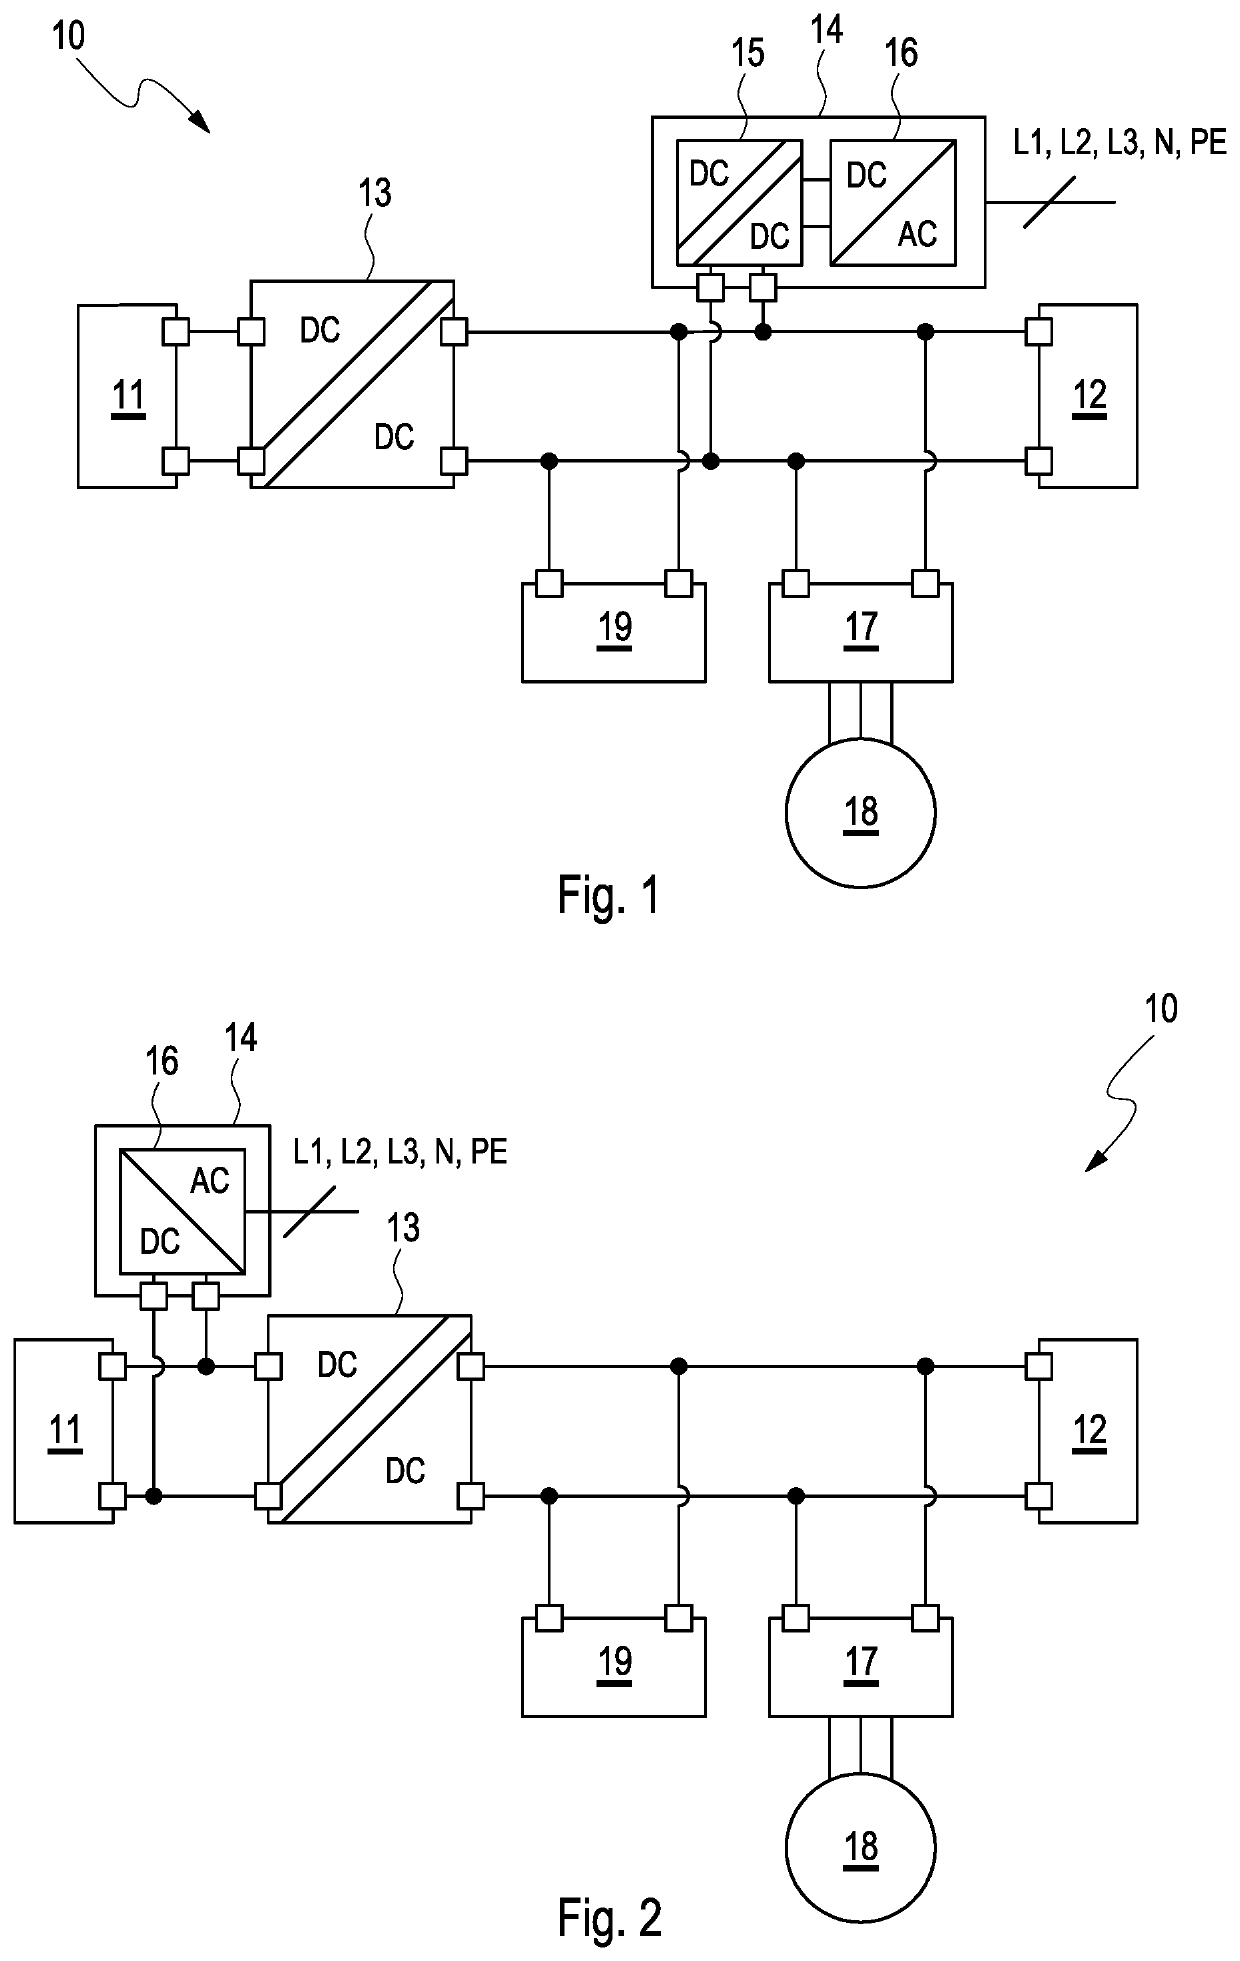 Electrical energy system with fuel cells